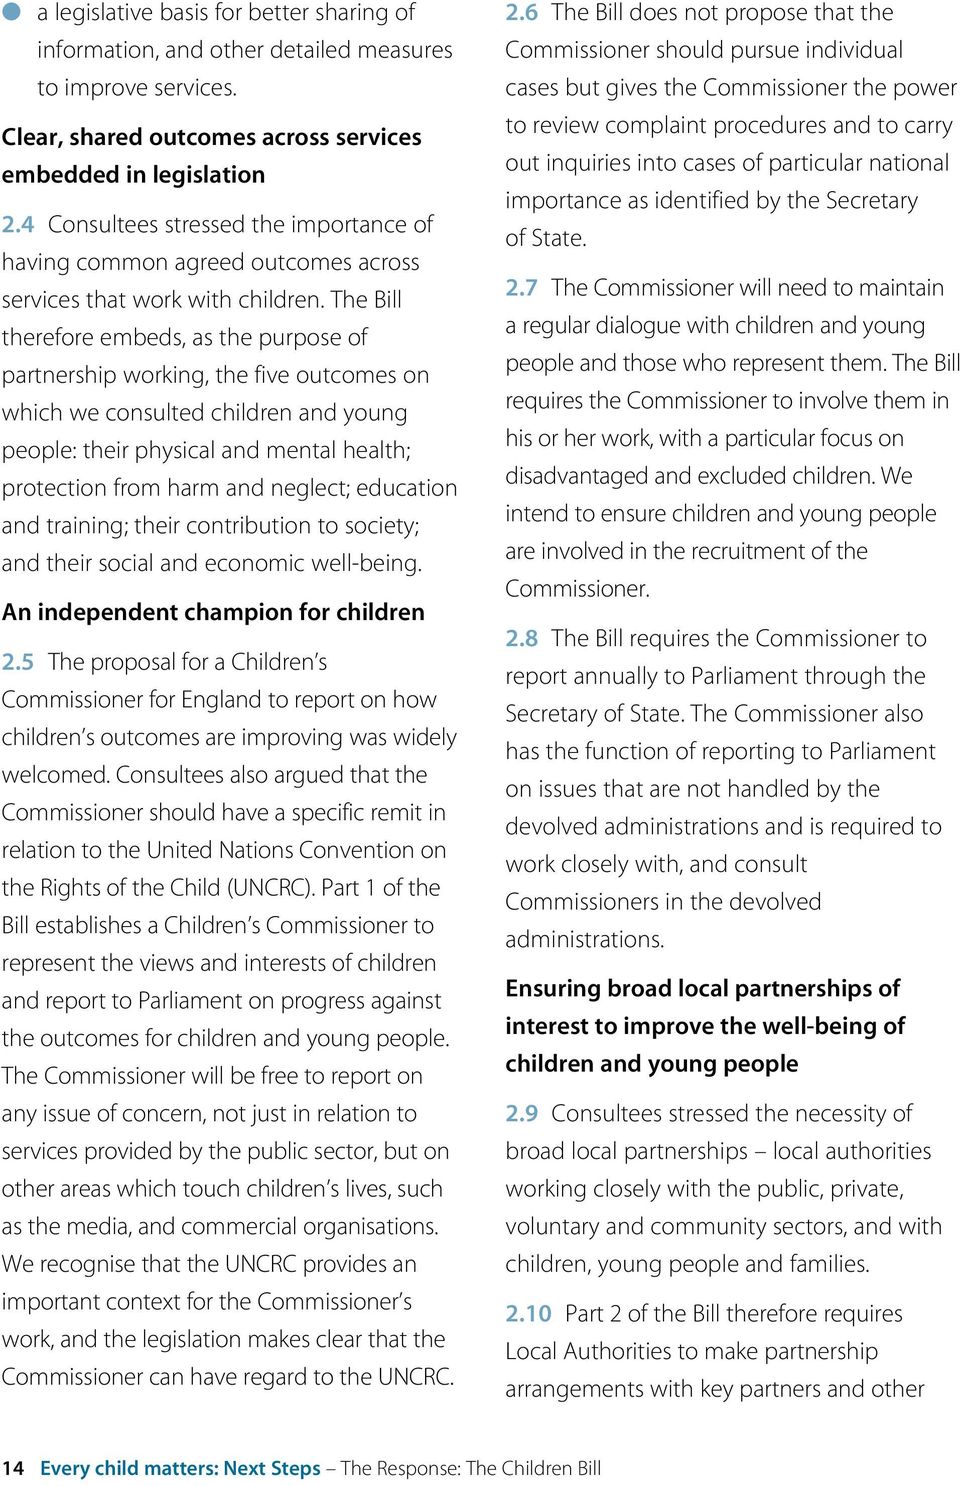 The Bill therefore embeds, as the purpose of partnership working, the five outcomes on which we consulted children and young people: their physical and mental health; protection from harm and